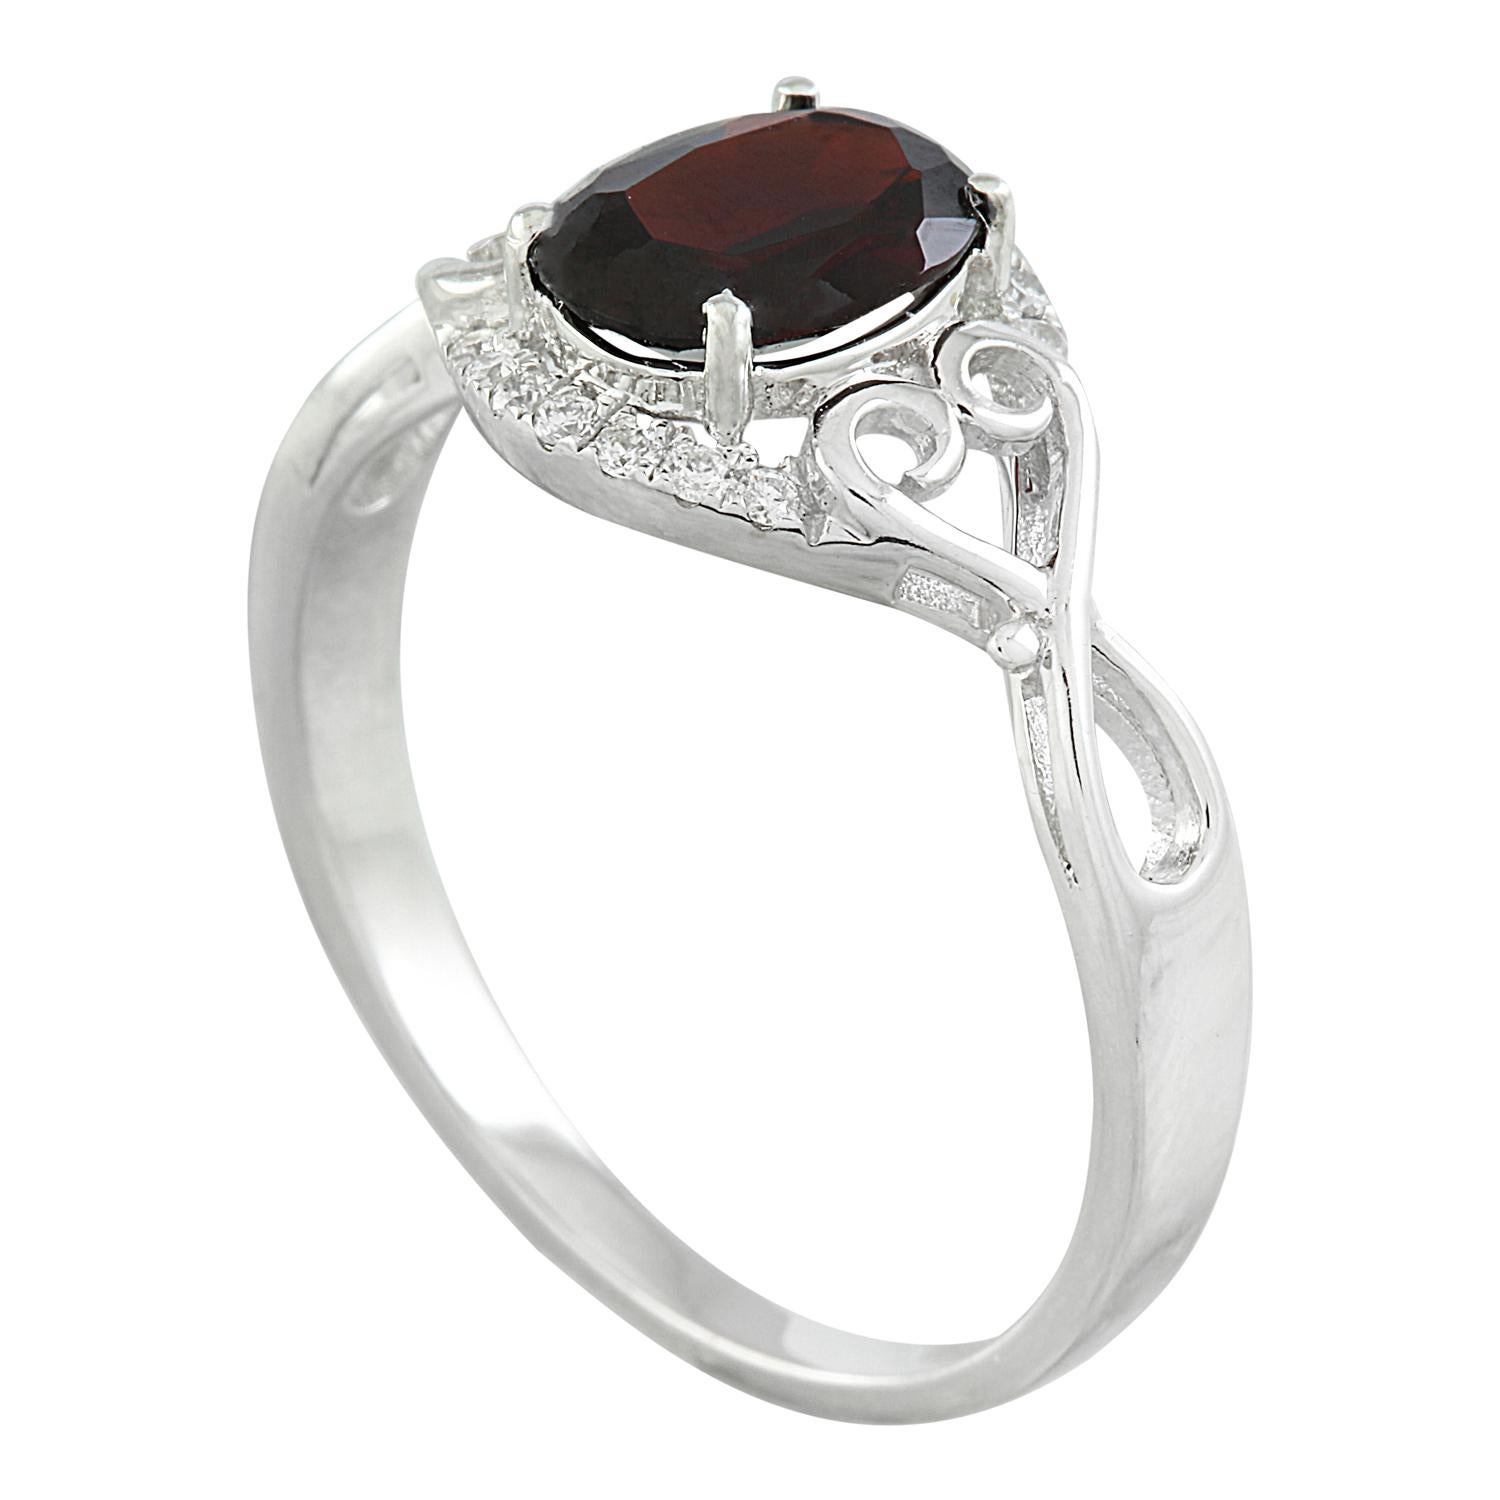 Introducing our stunning 1.27 Carat Natural Garnet Ring, crafted with finesse in elegant 14K Solid White Gold. Authenticated with a stamped mark of 14K, this exquisite ring weighs a total of 2.3 grams, ensuring both grace and durability. At its